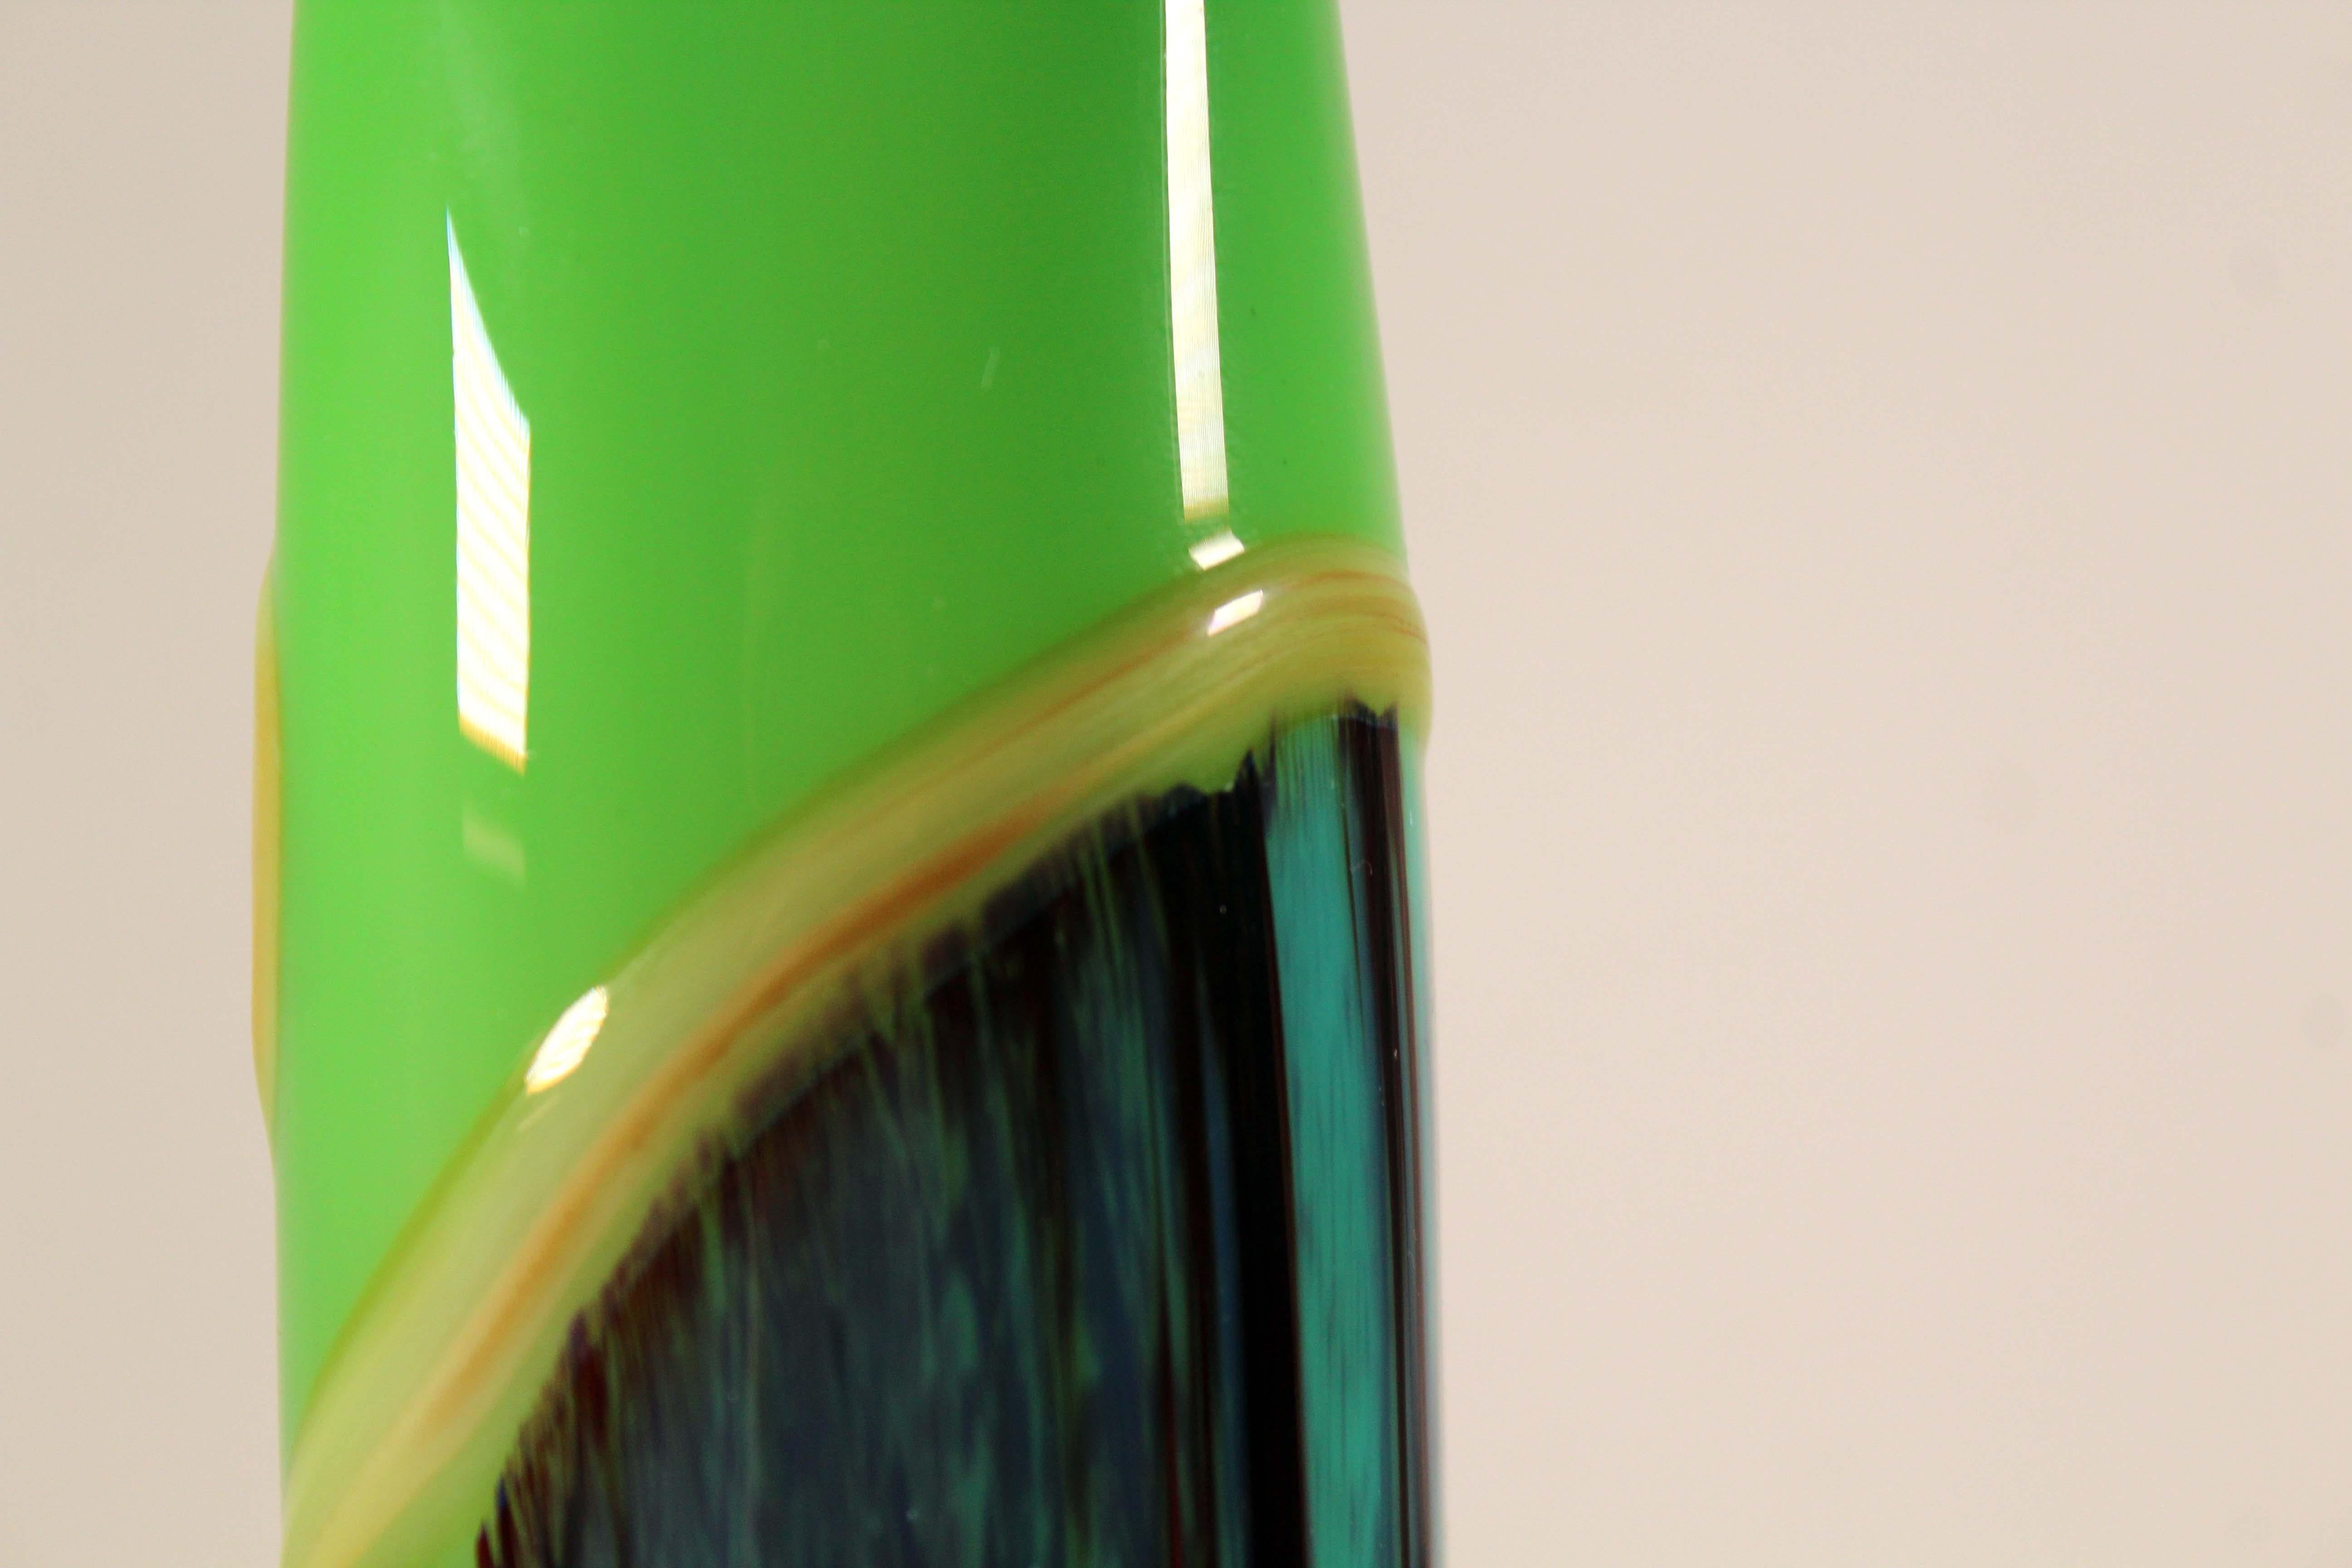 Late 20th Century Jack Schmidt Postmodern Studio Handblown Glass Tall Green and Blue Vase, 1975 For Sale